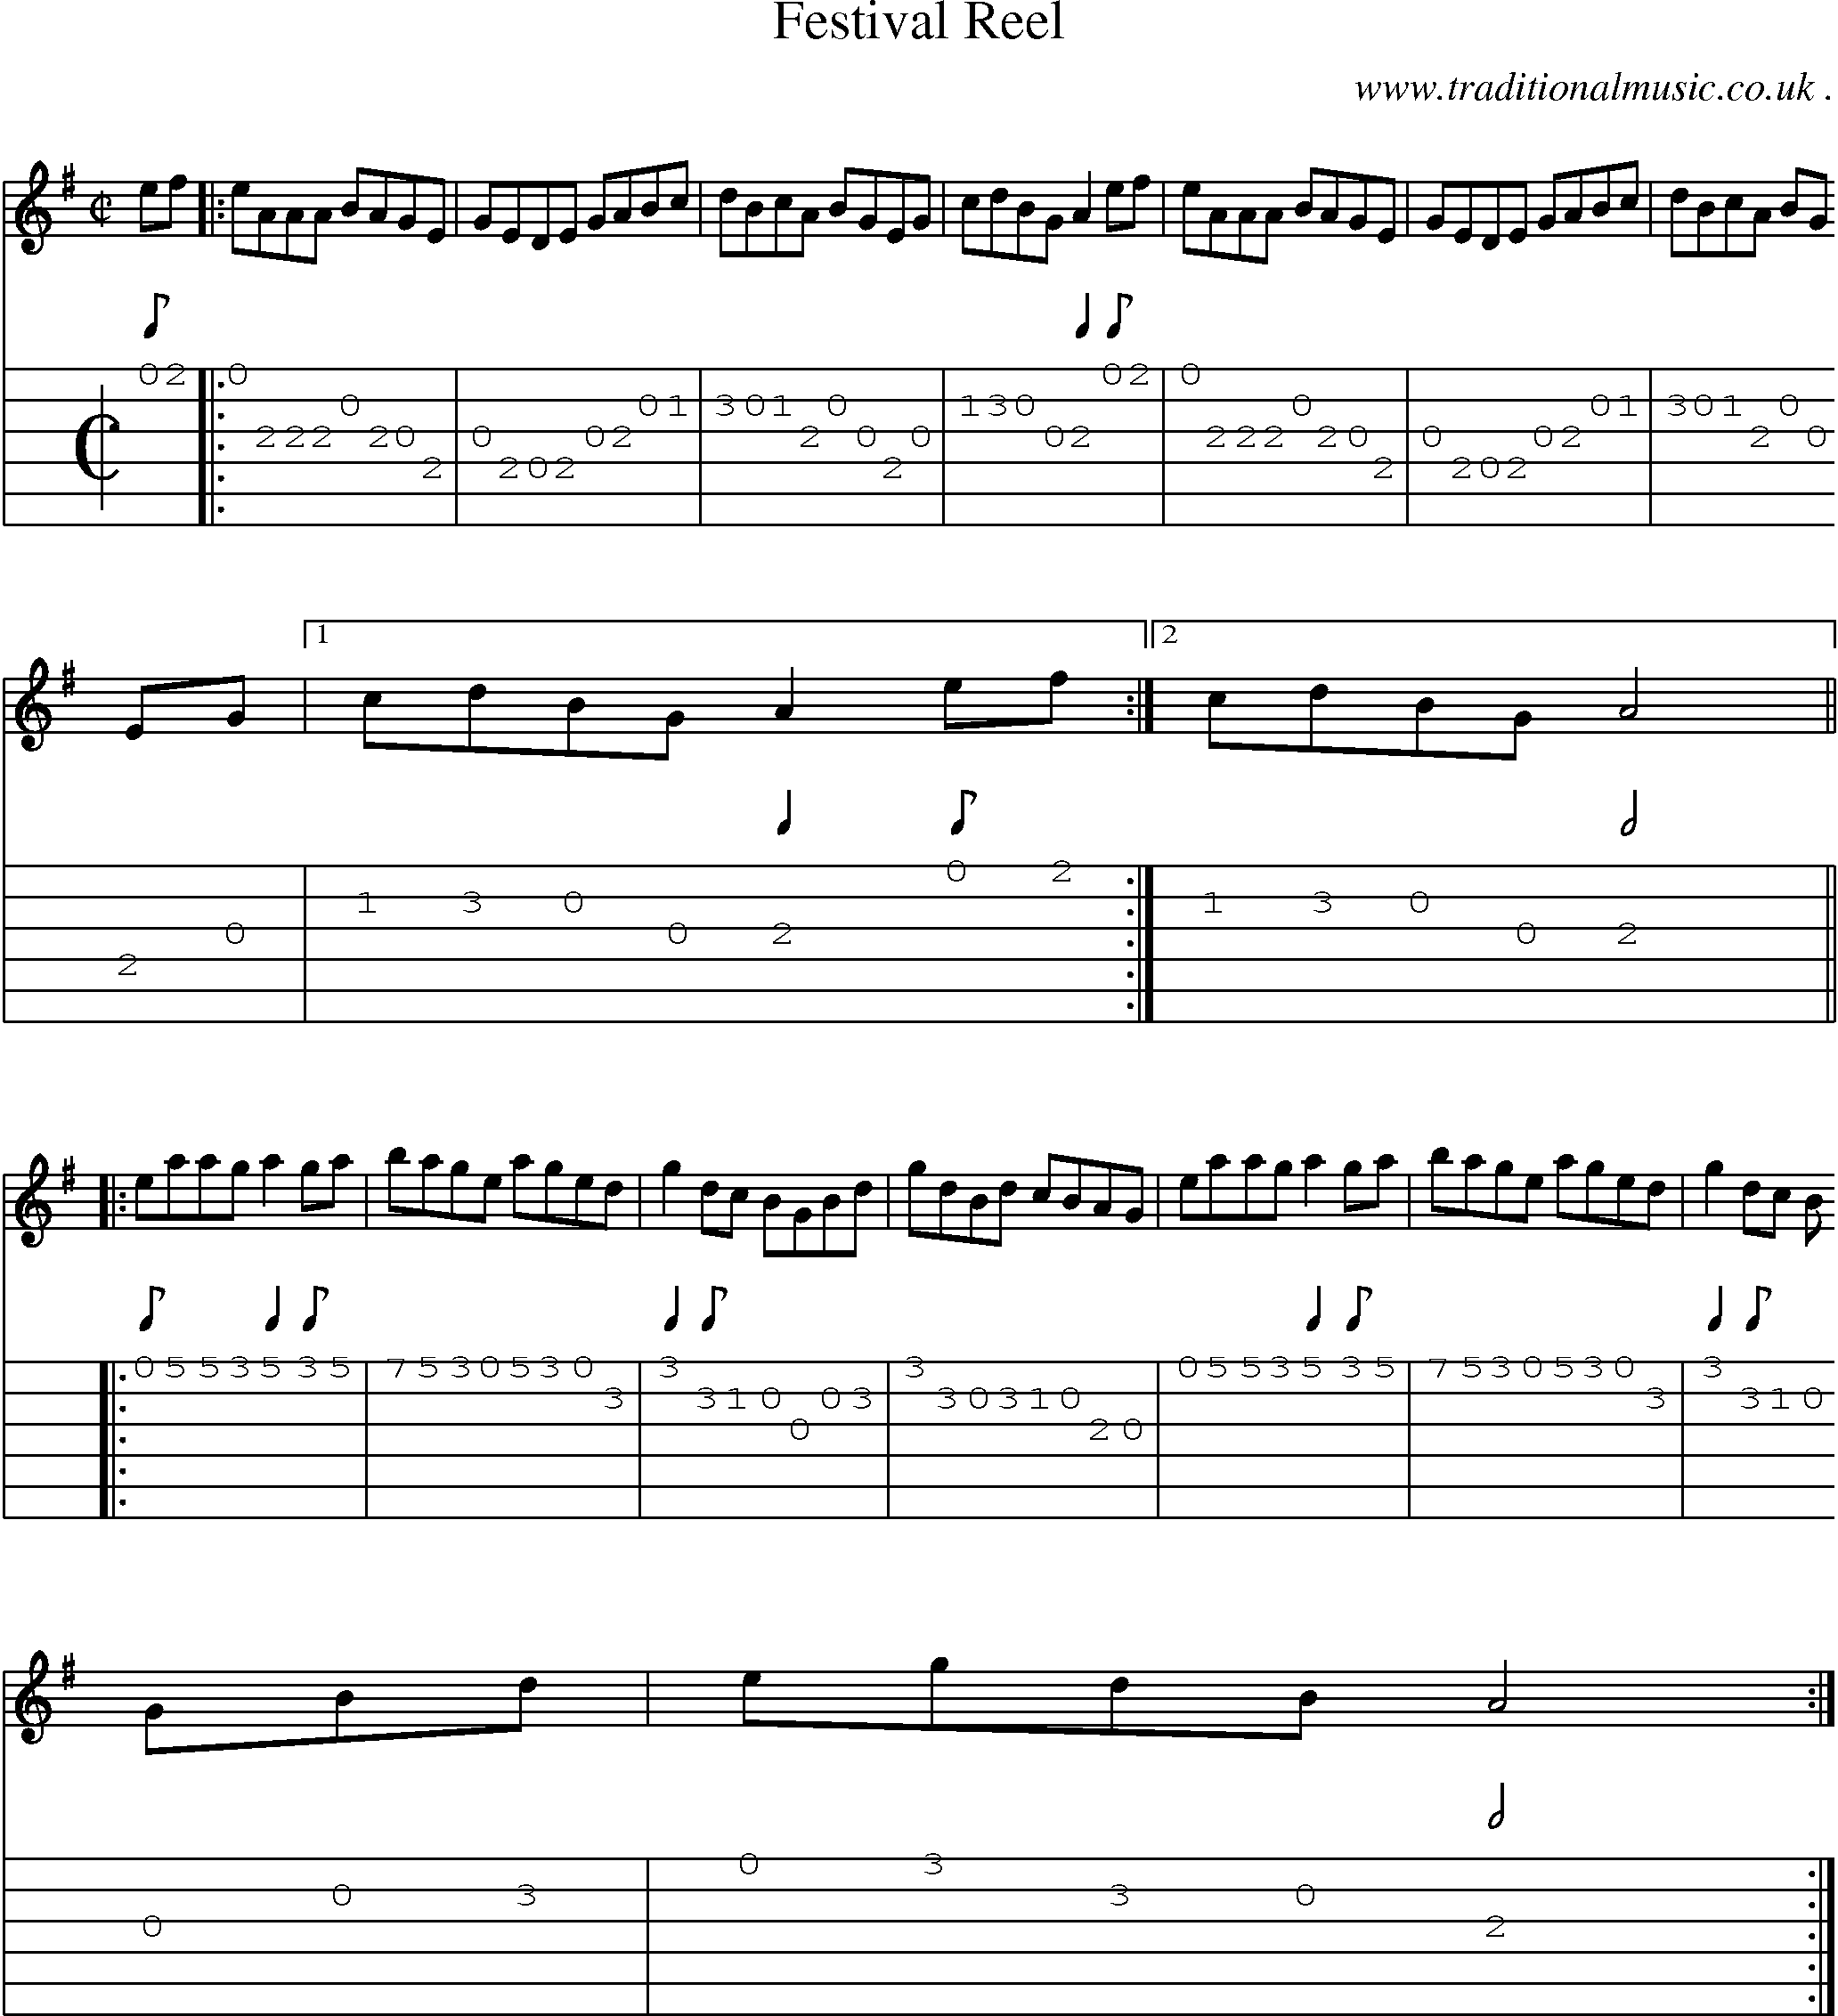 Sheet-Music and Guitar Tabs for Festival Reel